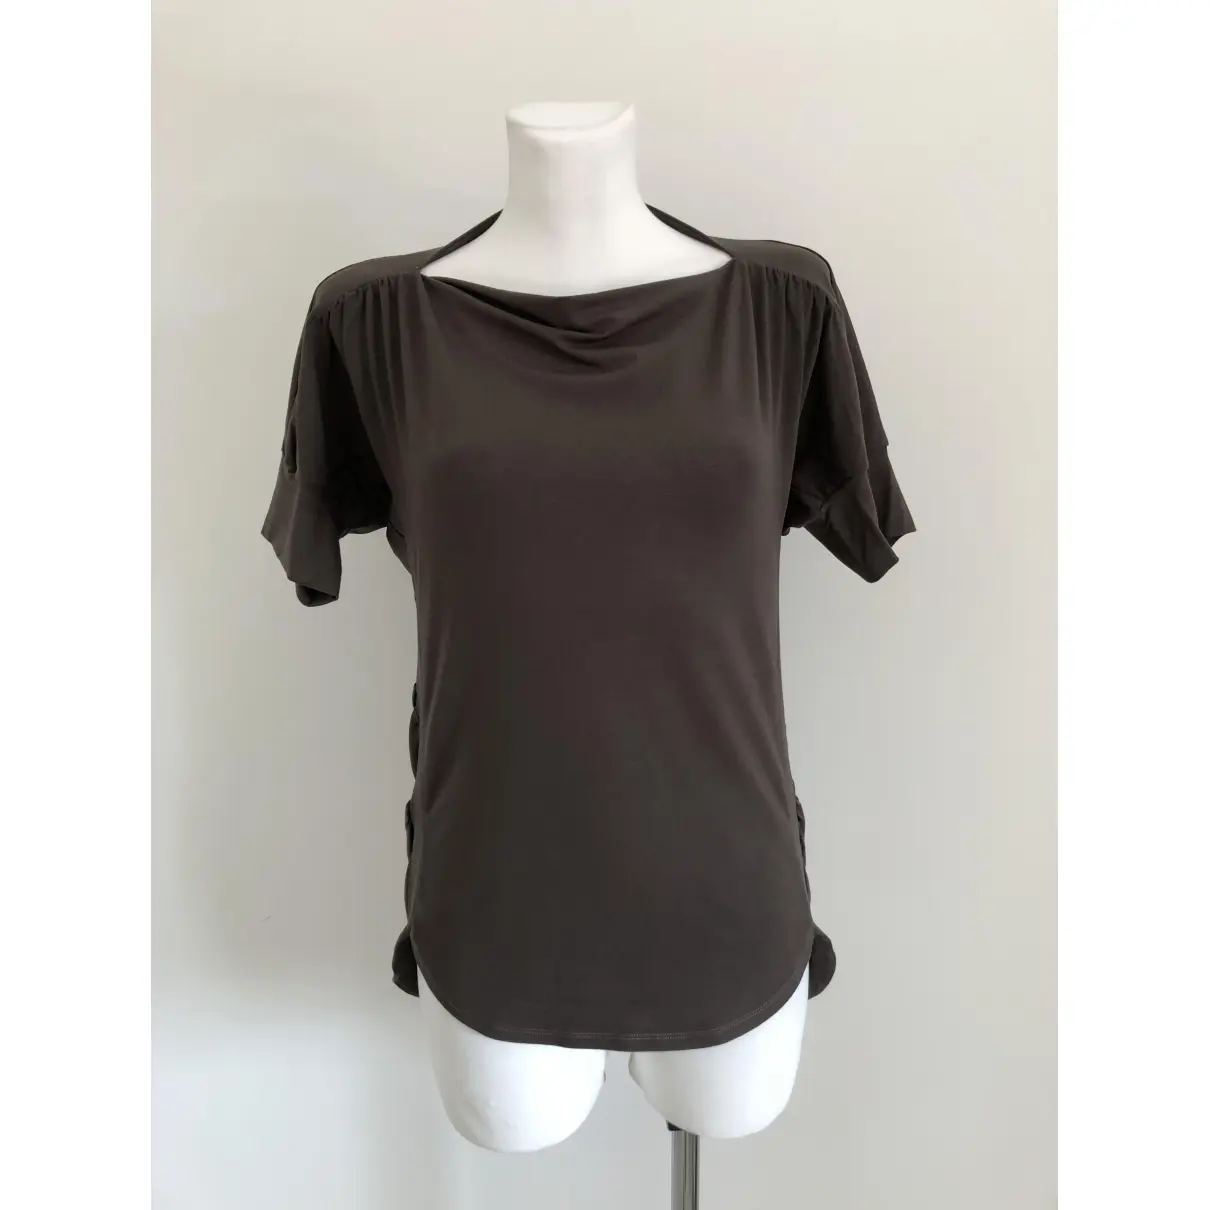 Repetto Jersey top for sale